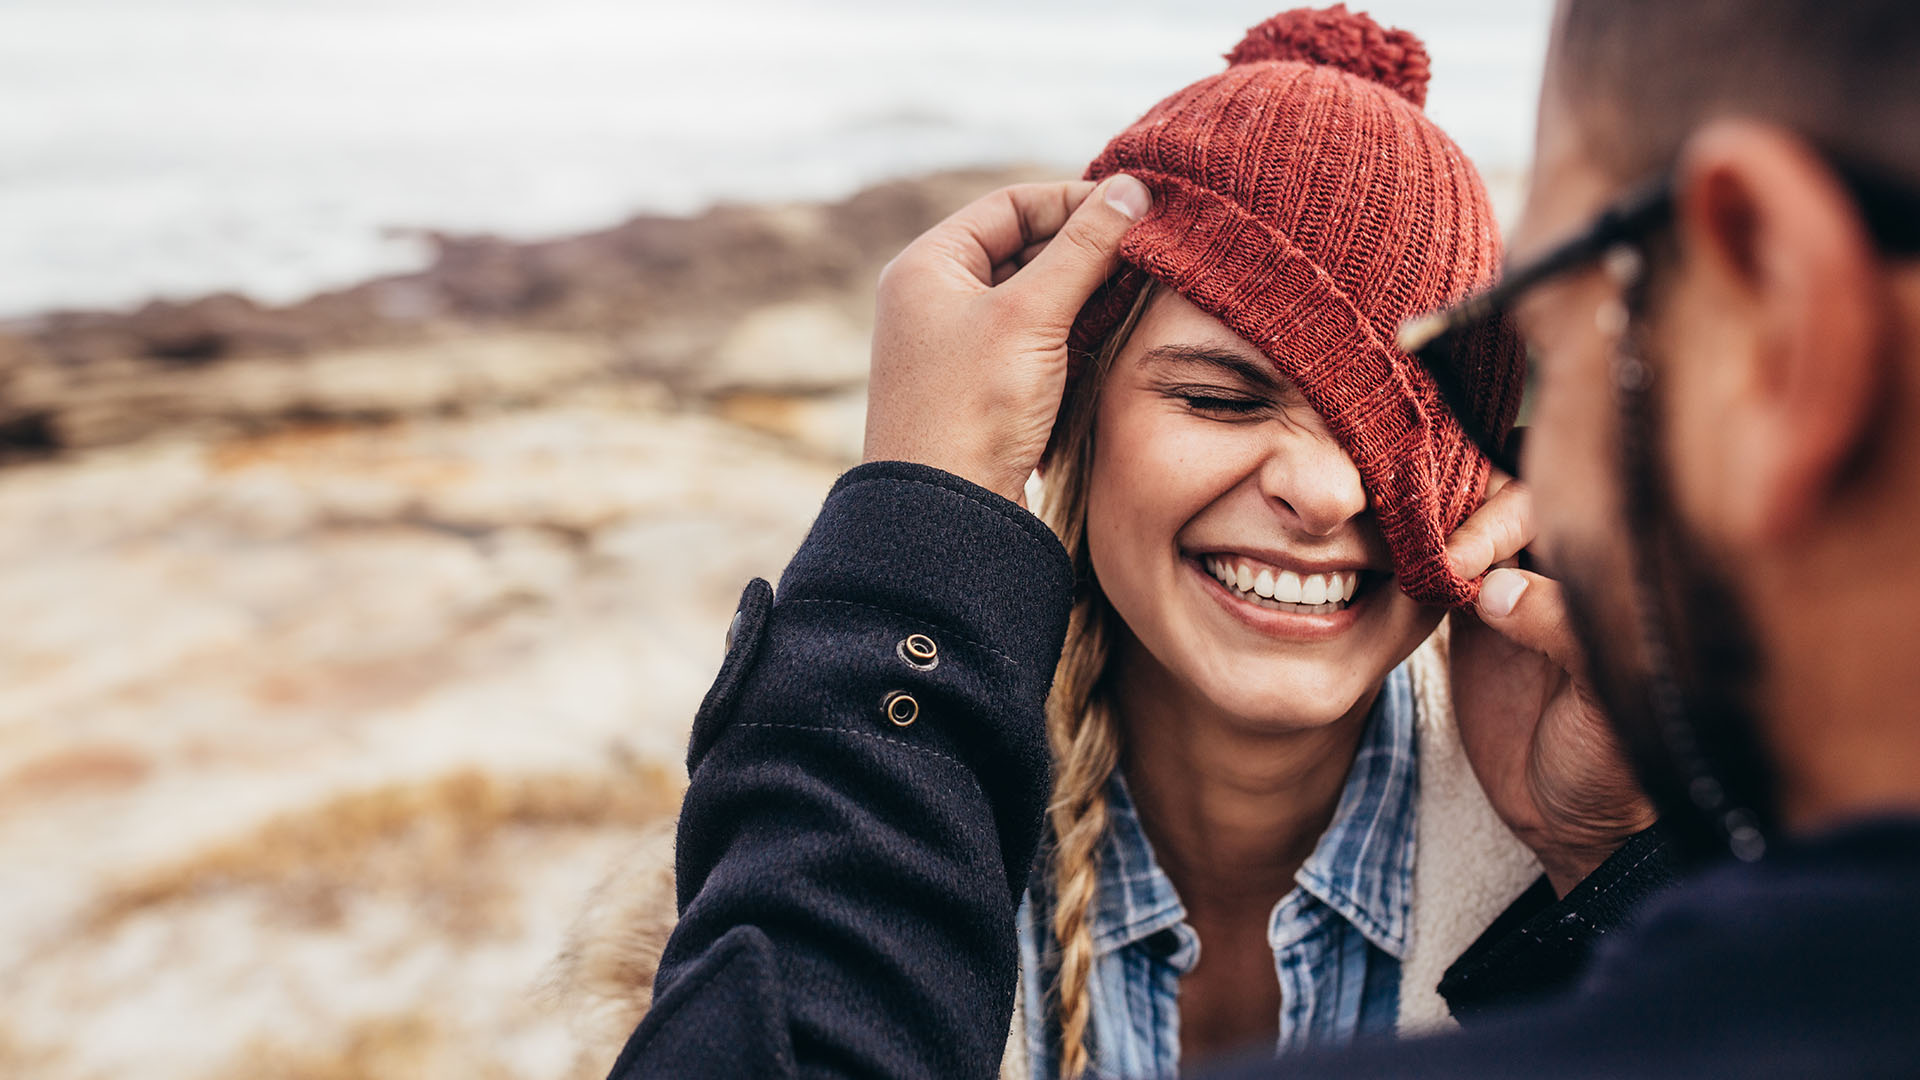 Blonde woman laughing while brunette man in sunglasses crooks red beanie over her face. Ocean in the background.